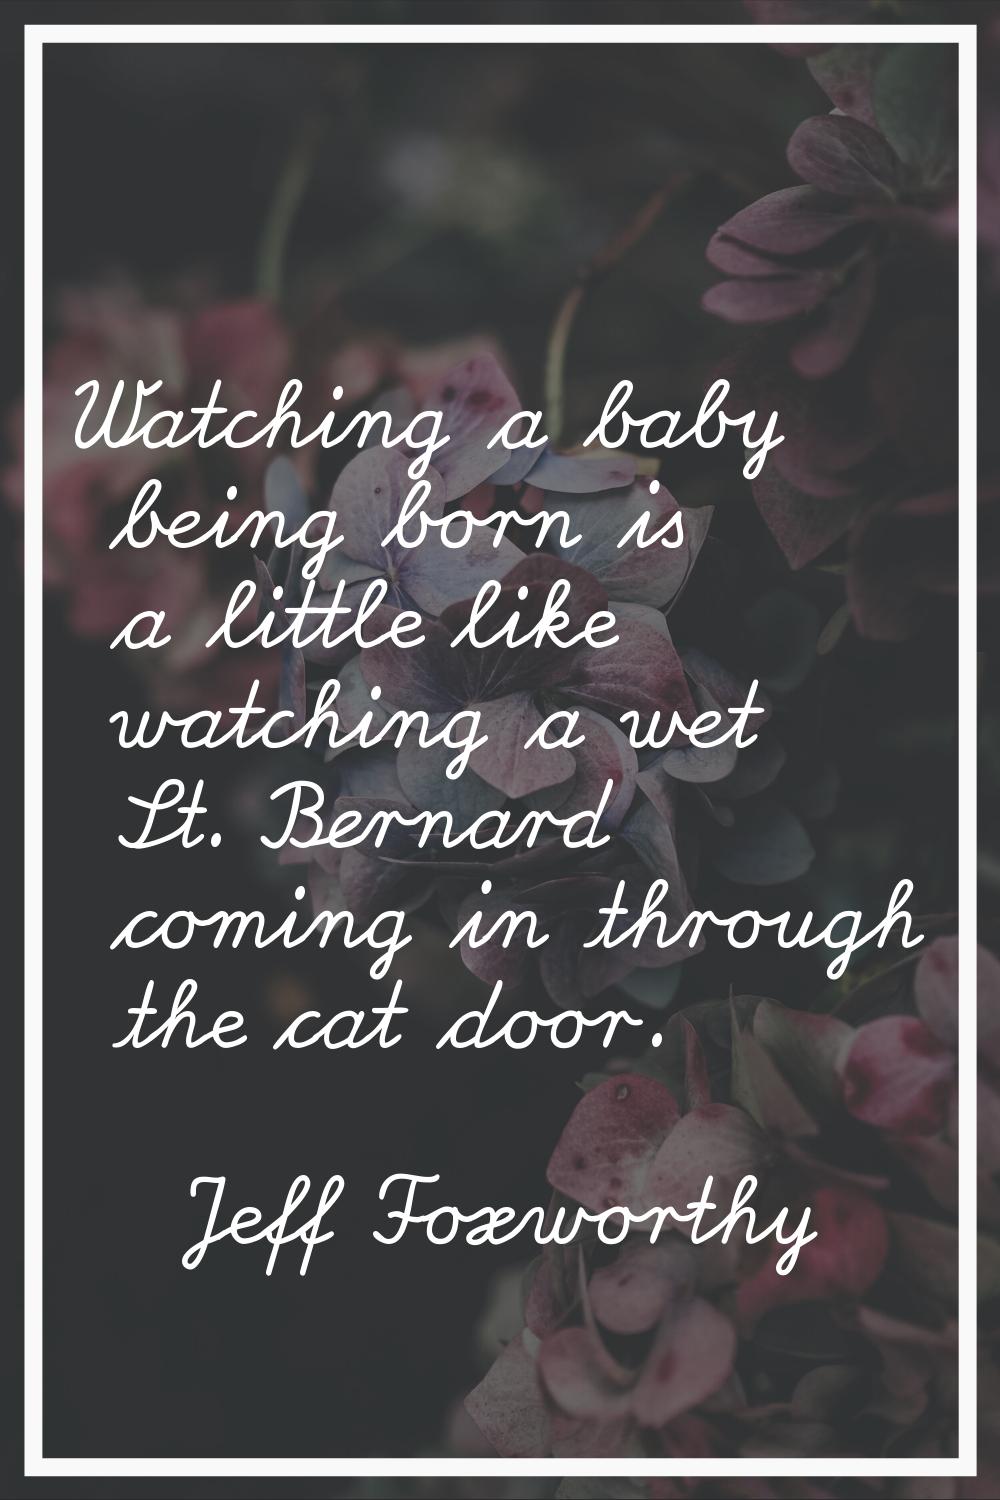 Watching a baby being born is a little like watching a wet St. Bernard coming in through the cat do